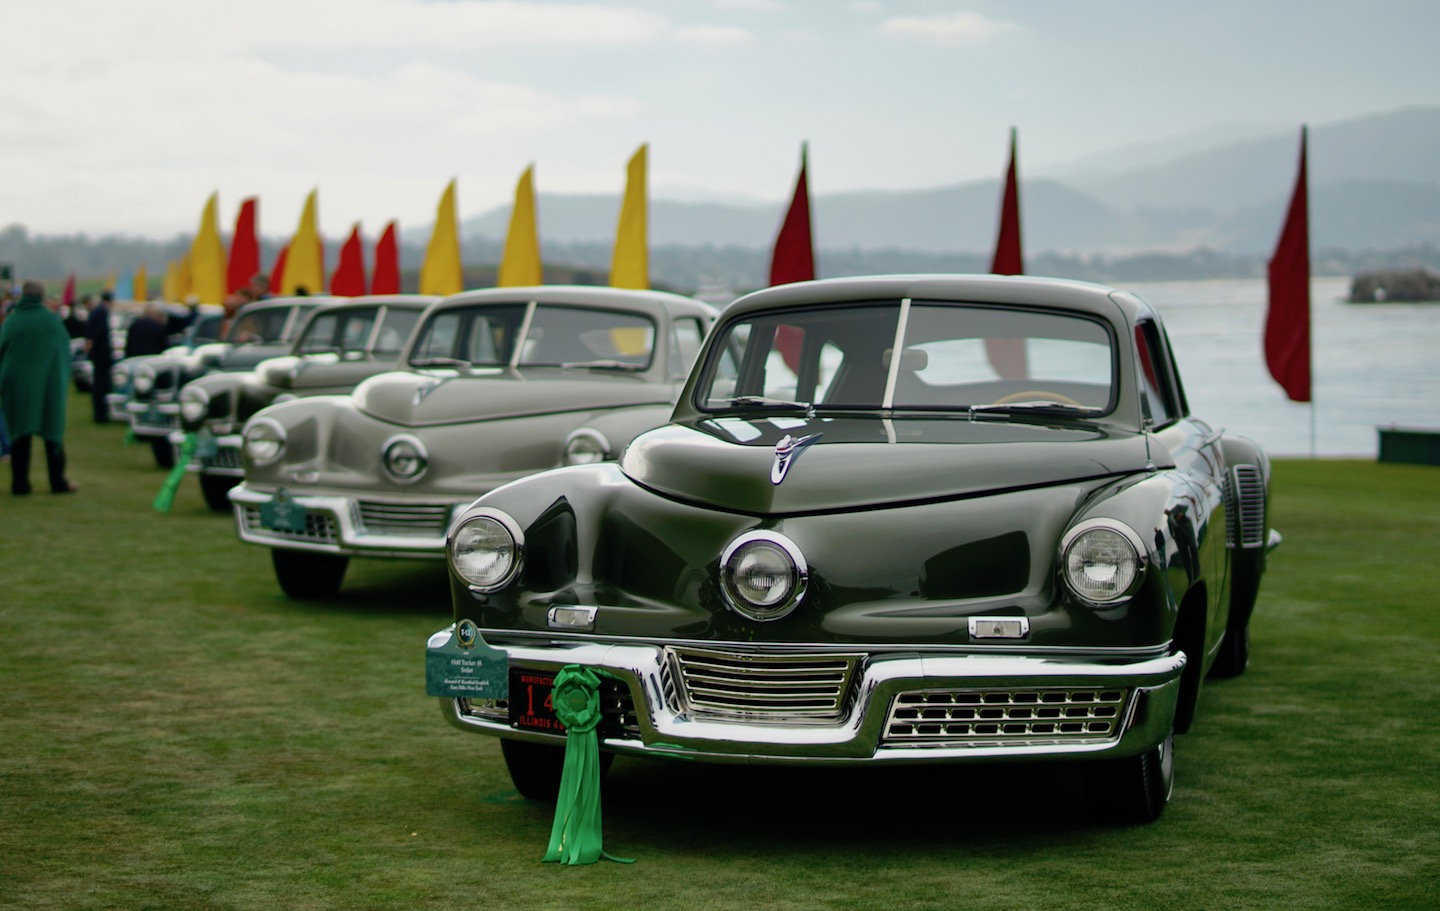 The Best of Monterey Car Week 2018 - Part 6: The Concours d'Elegance